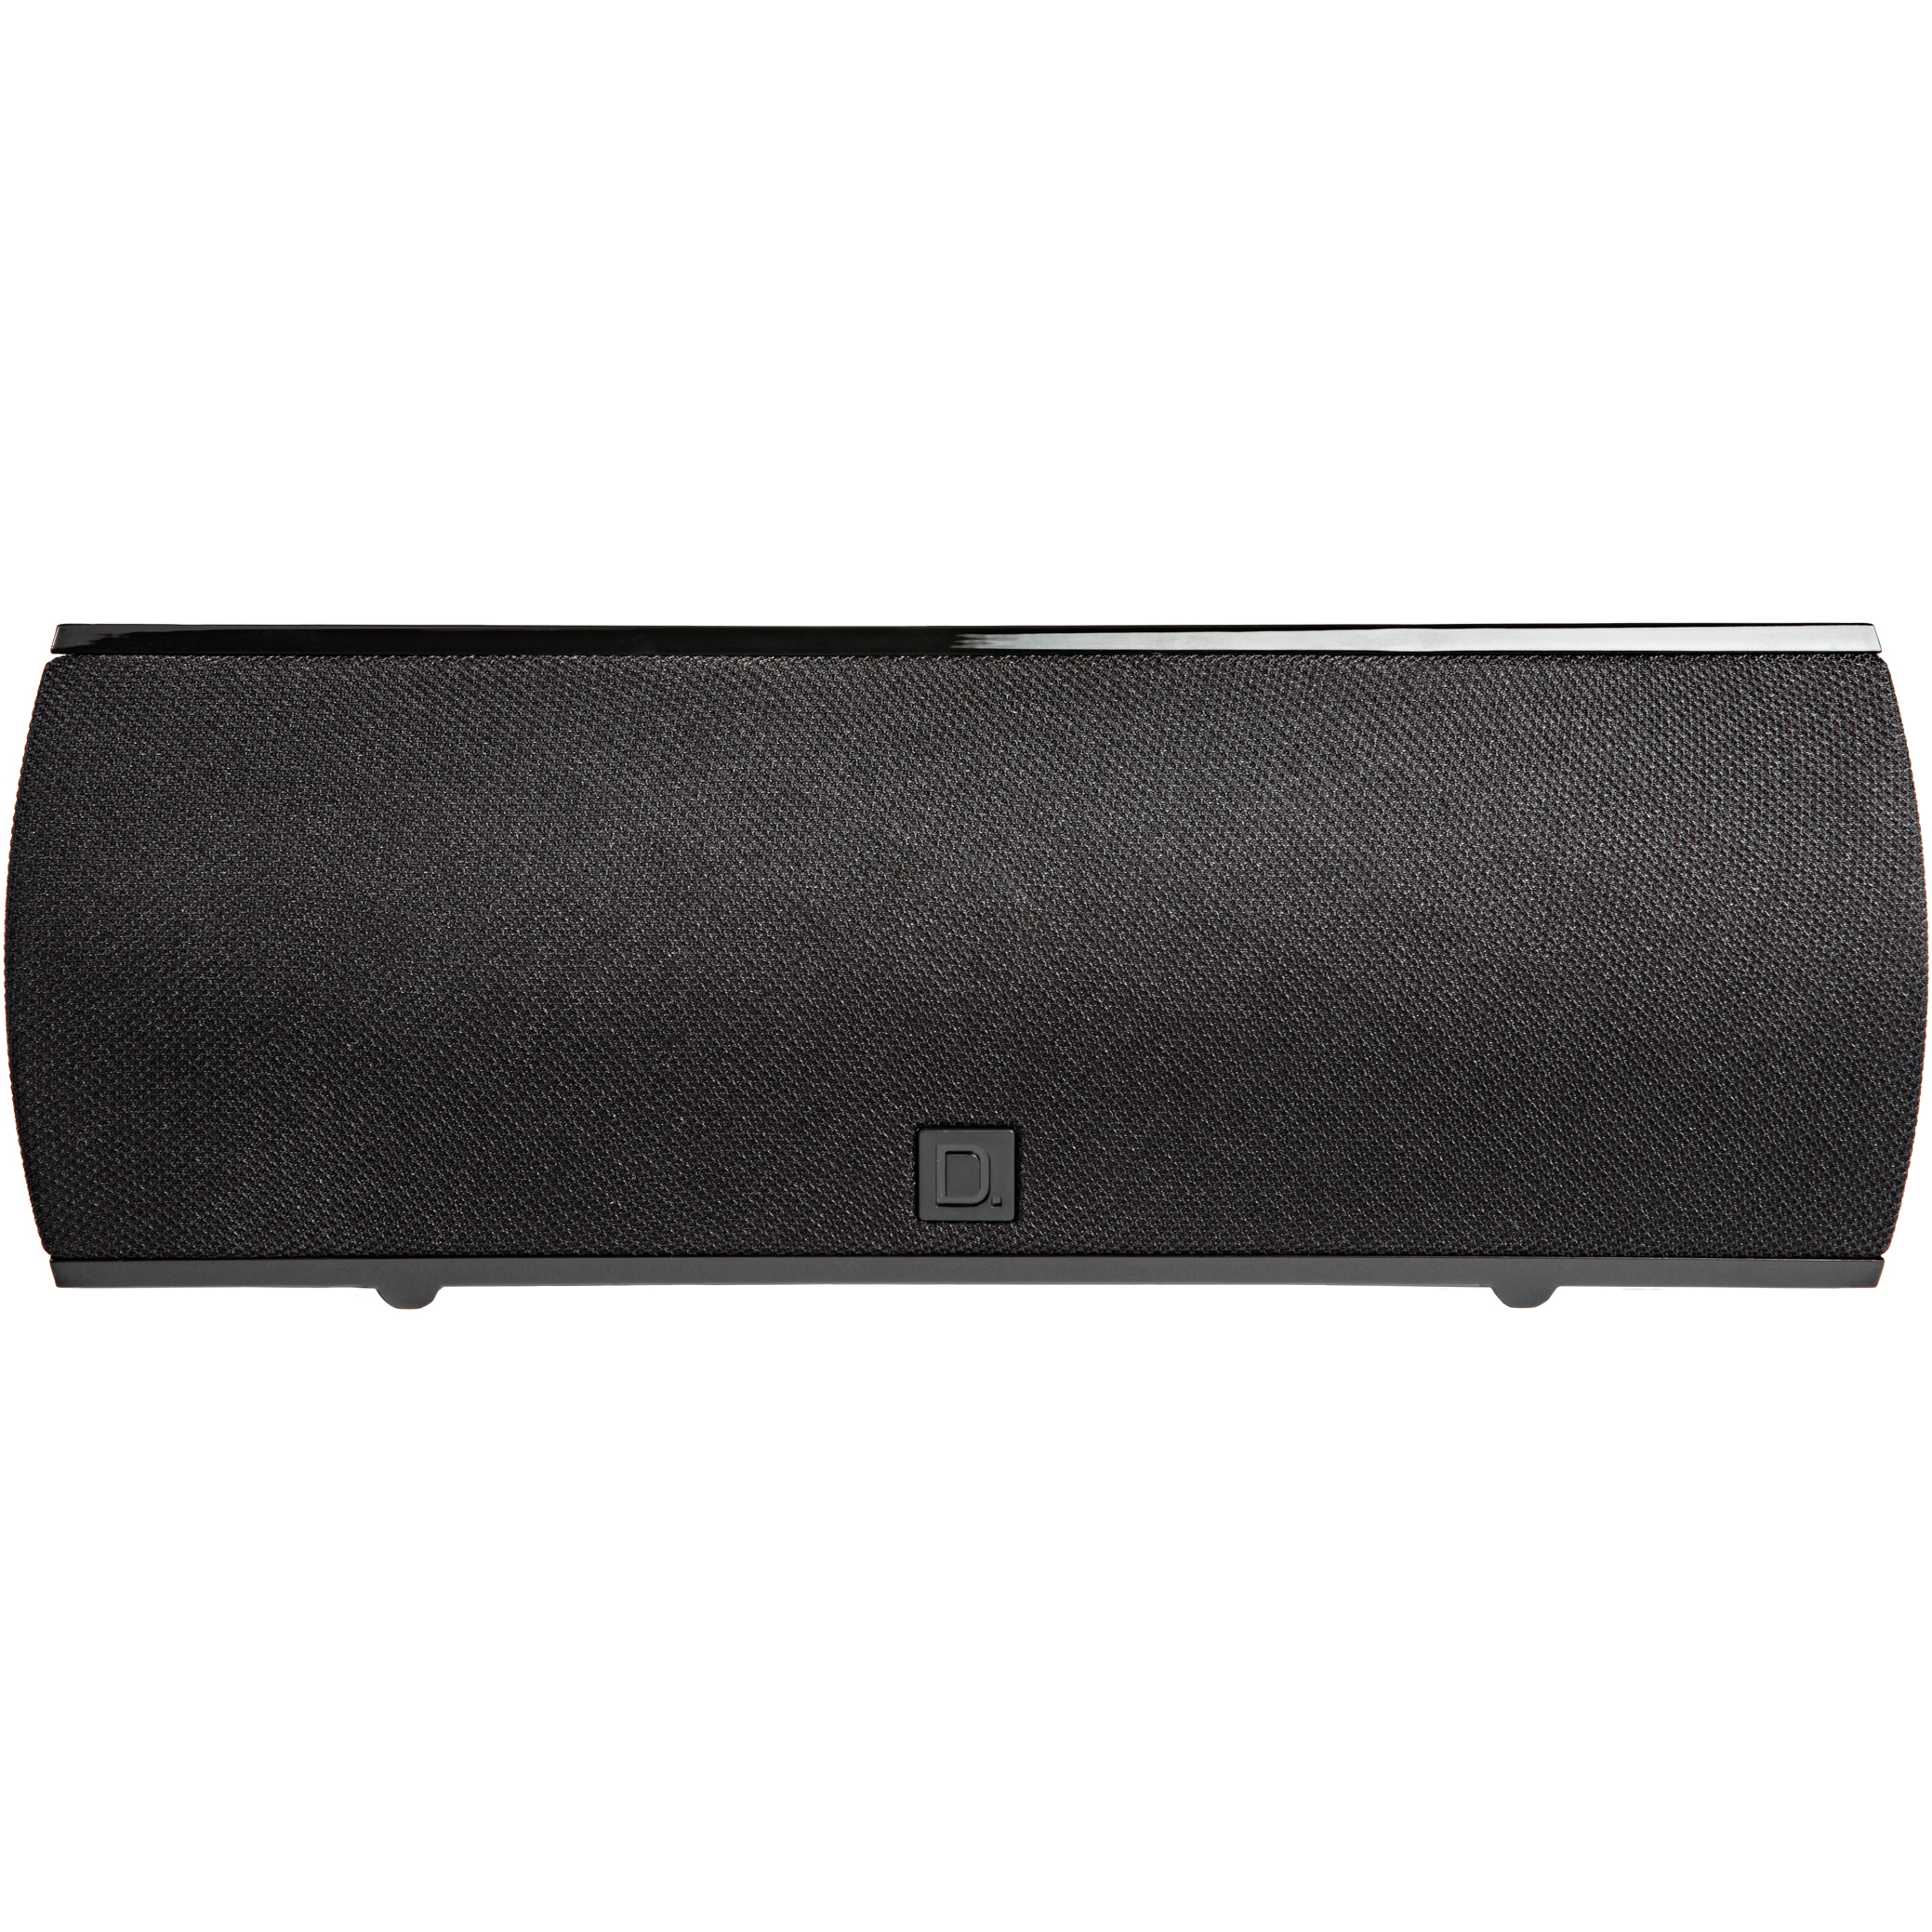 ProCinema Series 5.1 Channel High-Performance Compact Surround Sound System - image 2 of 17